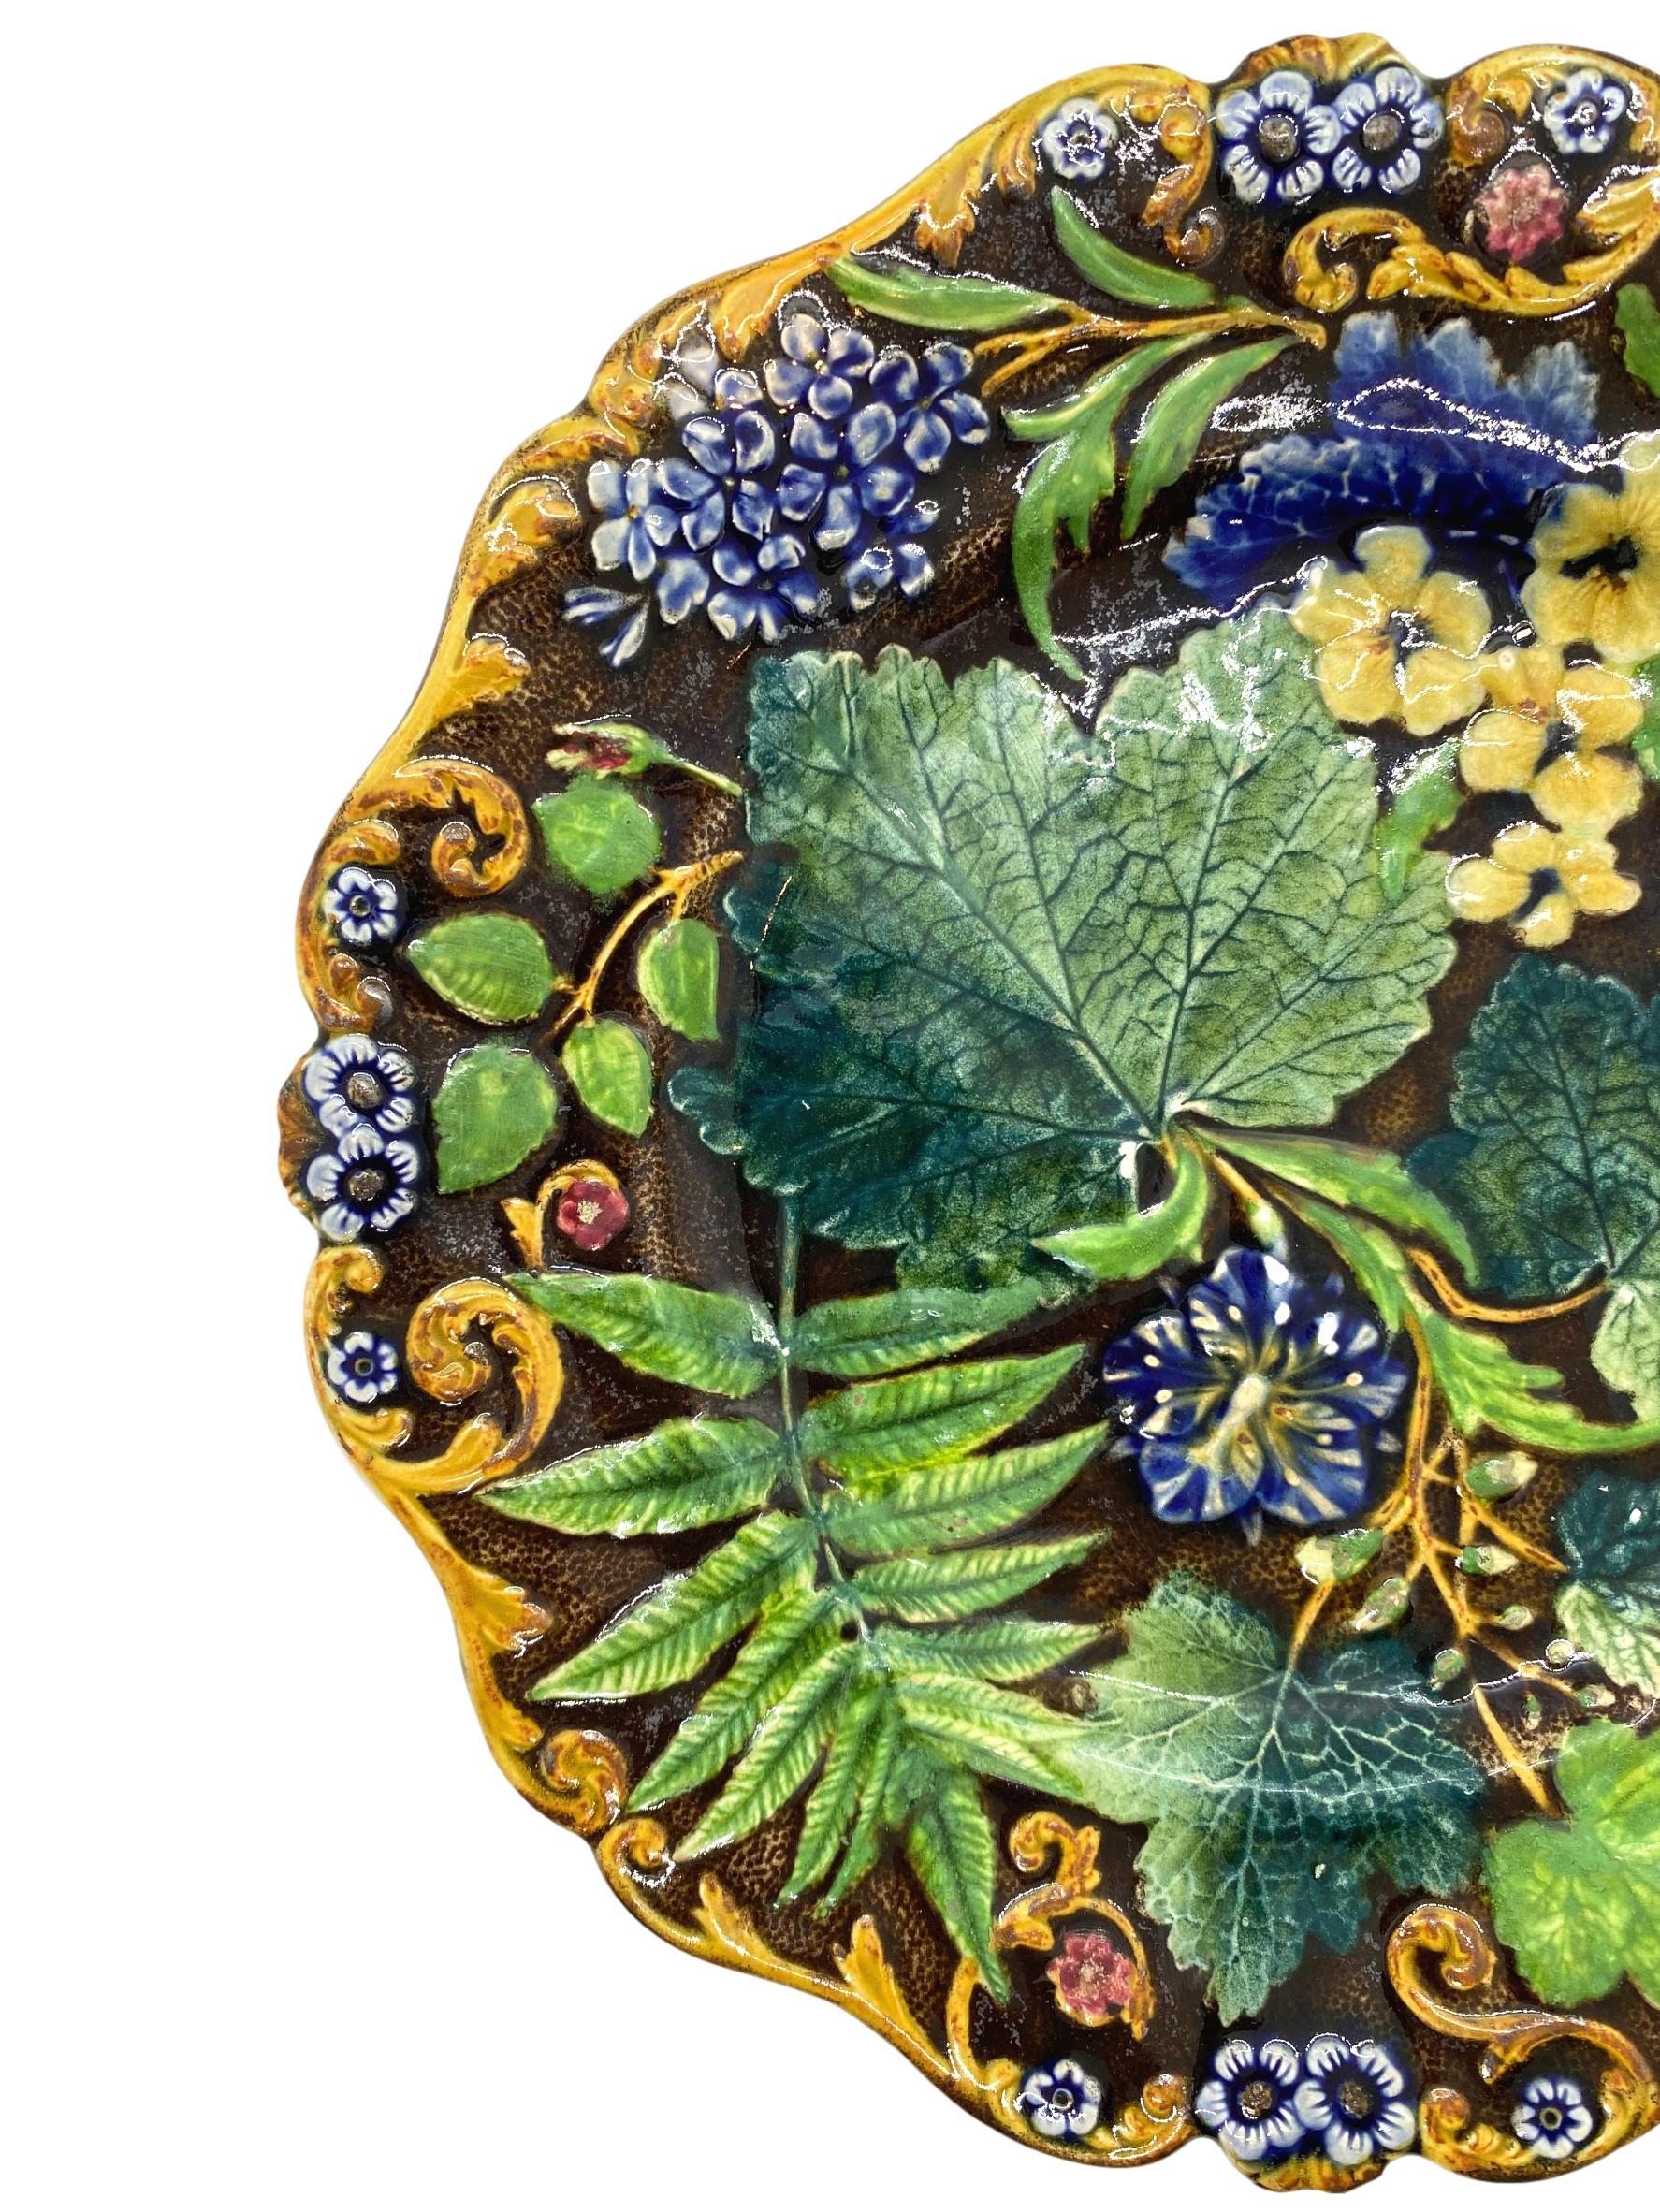 Samuel Alcock Majolica 9 inches Botanical plate, English, circa 1875. This rare design is one of the most beautiful and sought after ever produced in majolica, a first-rate connoisseur example of the best English majolica. 
This design by Samuel